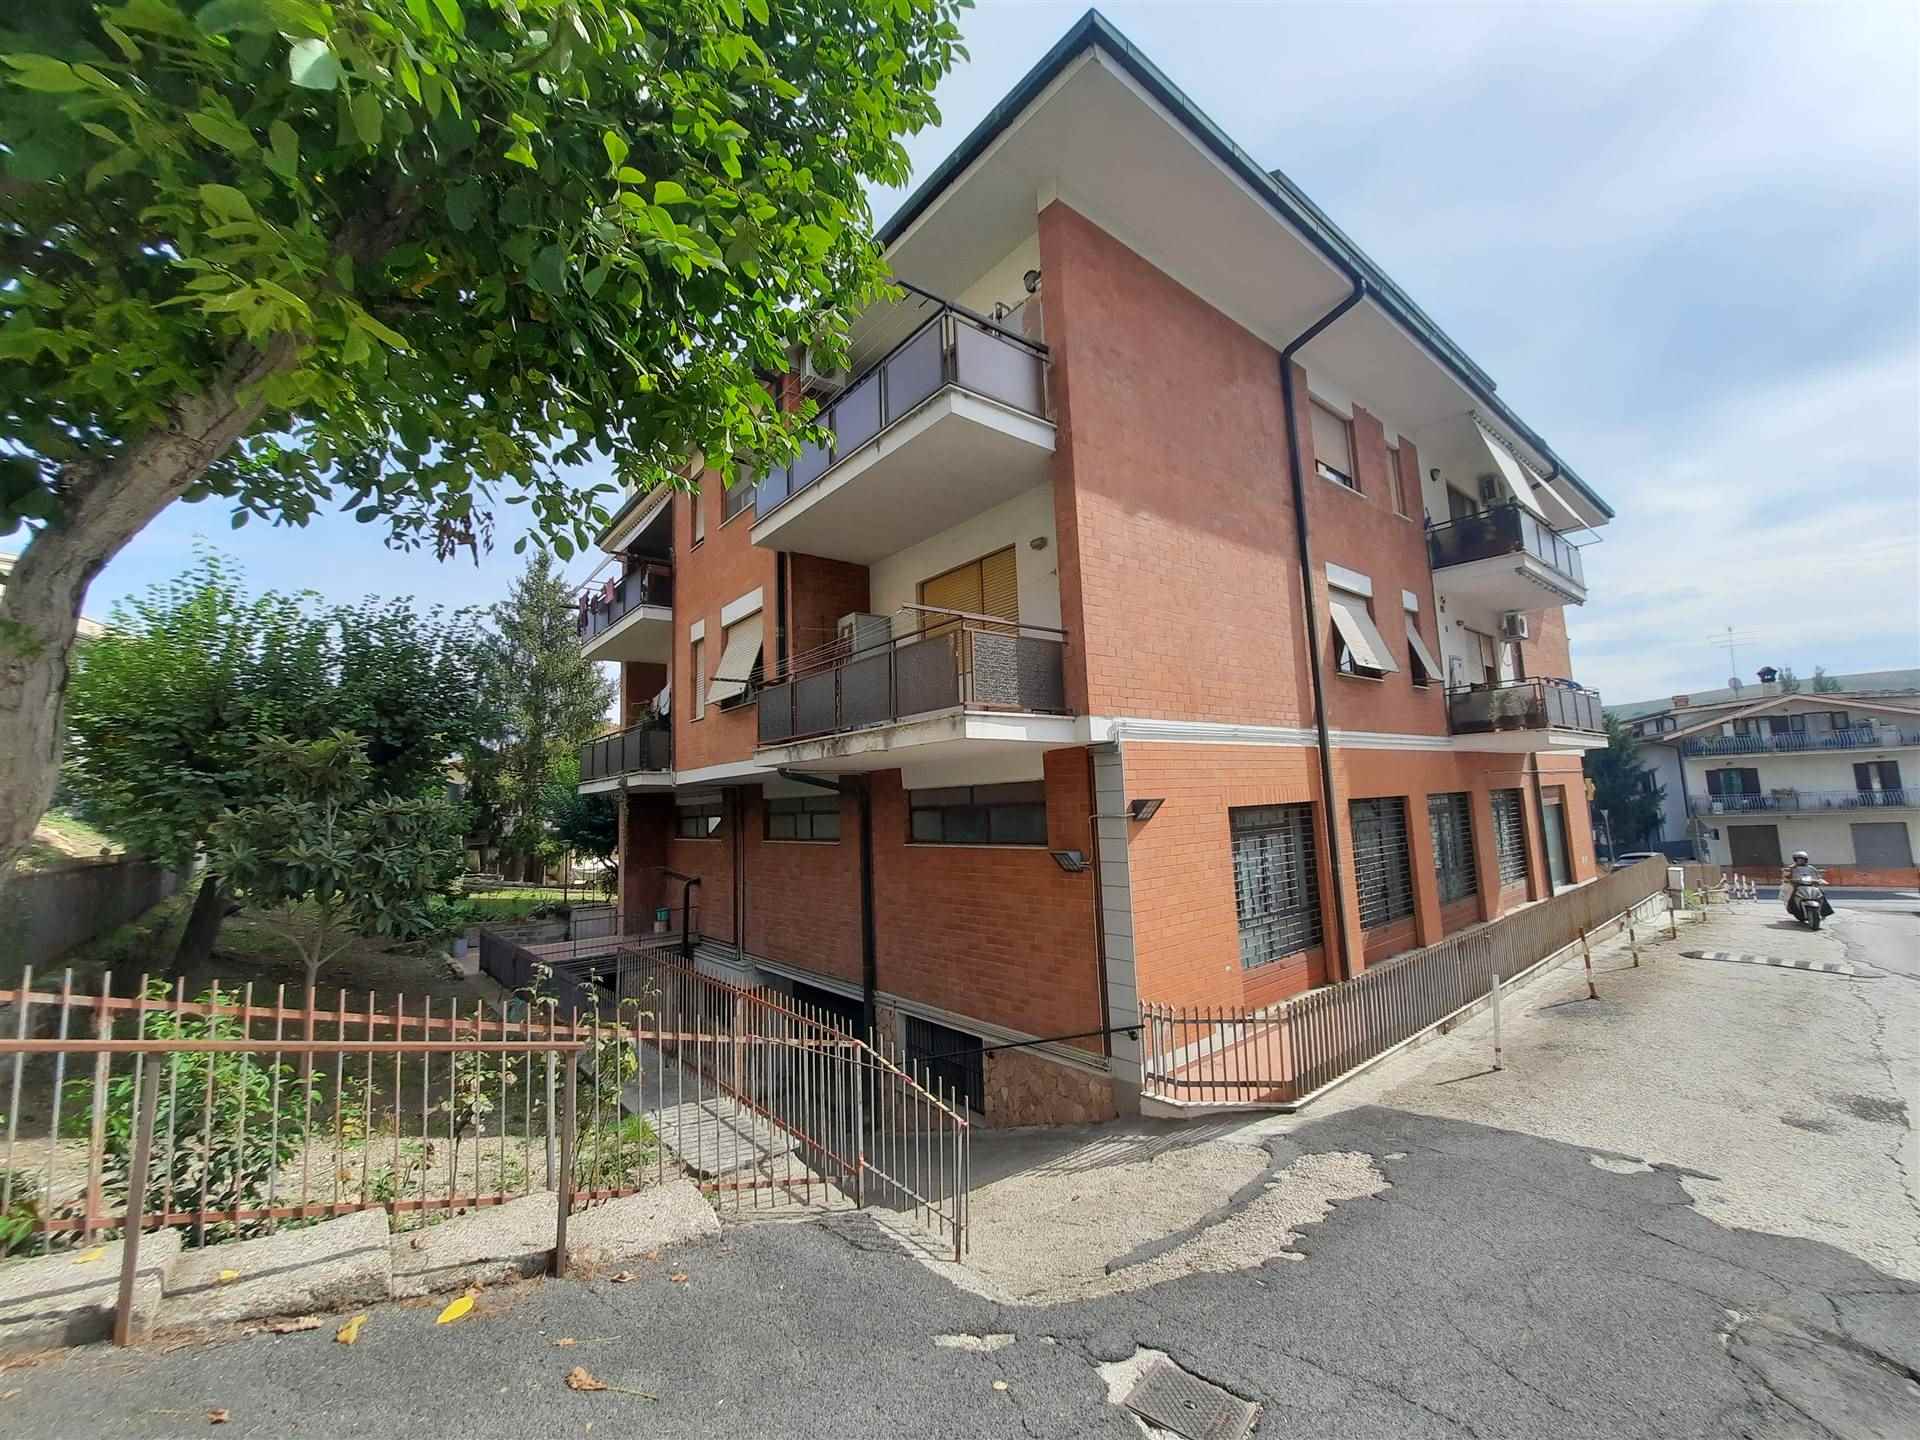 SANTA LUCIA, FONTE NUOVA, Apartment for sale of 100 Sq. mt., Good condition, Heating Individual heating system, Energetic class: G, placed at 2° on 2, composed by: 3 Rooms, Separate kitchen, , 2 